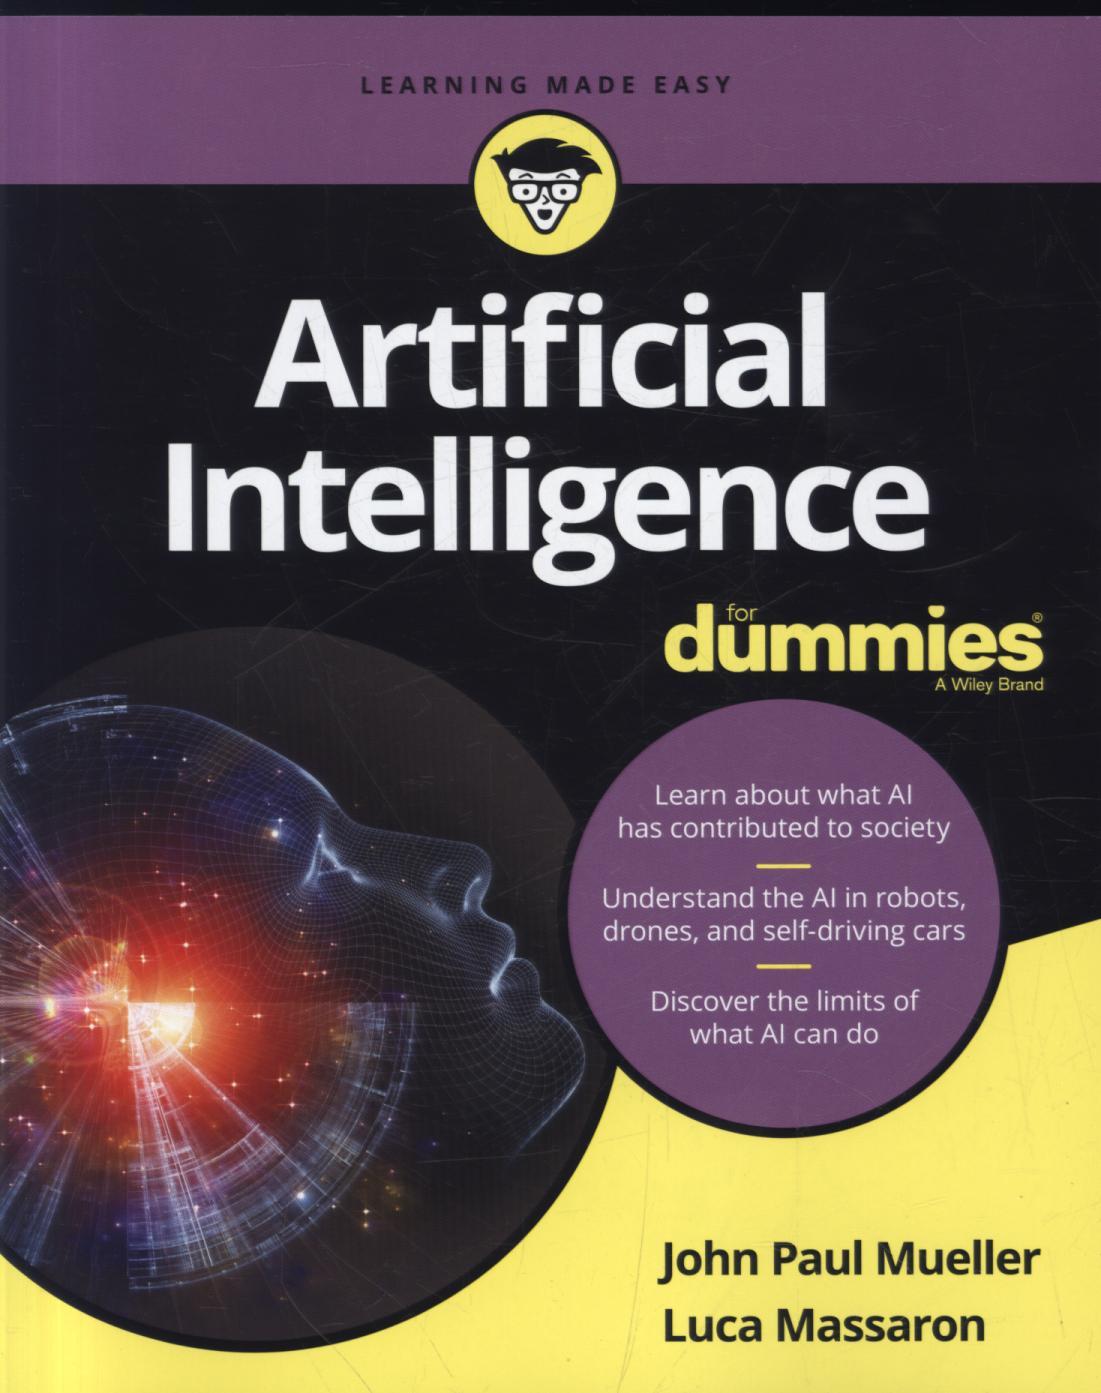 Artificial Intelligence For Dummies